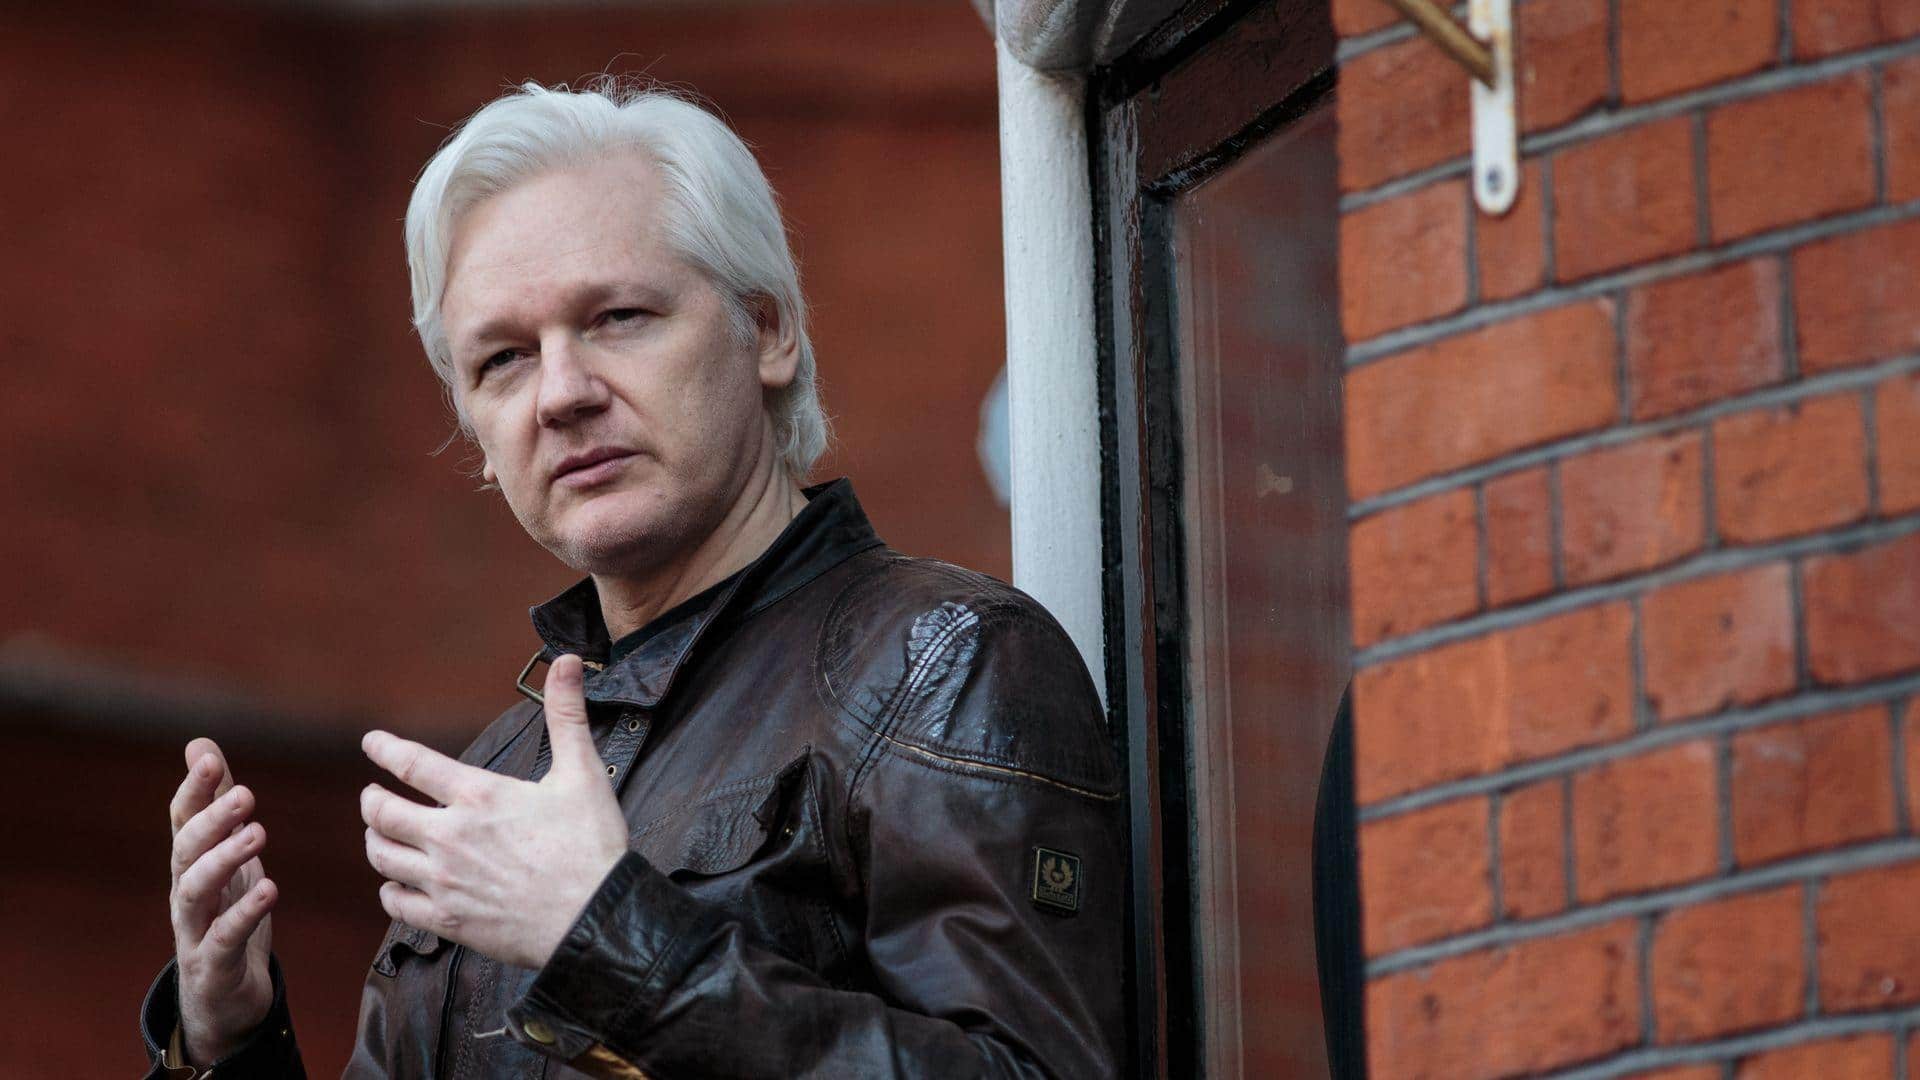 Who is Julian Assange and what secrets did he leak?